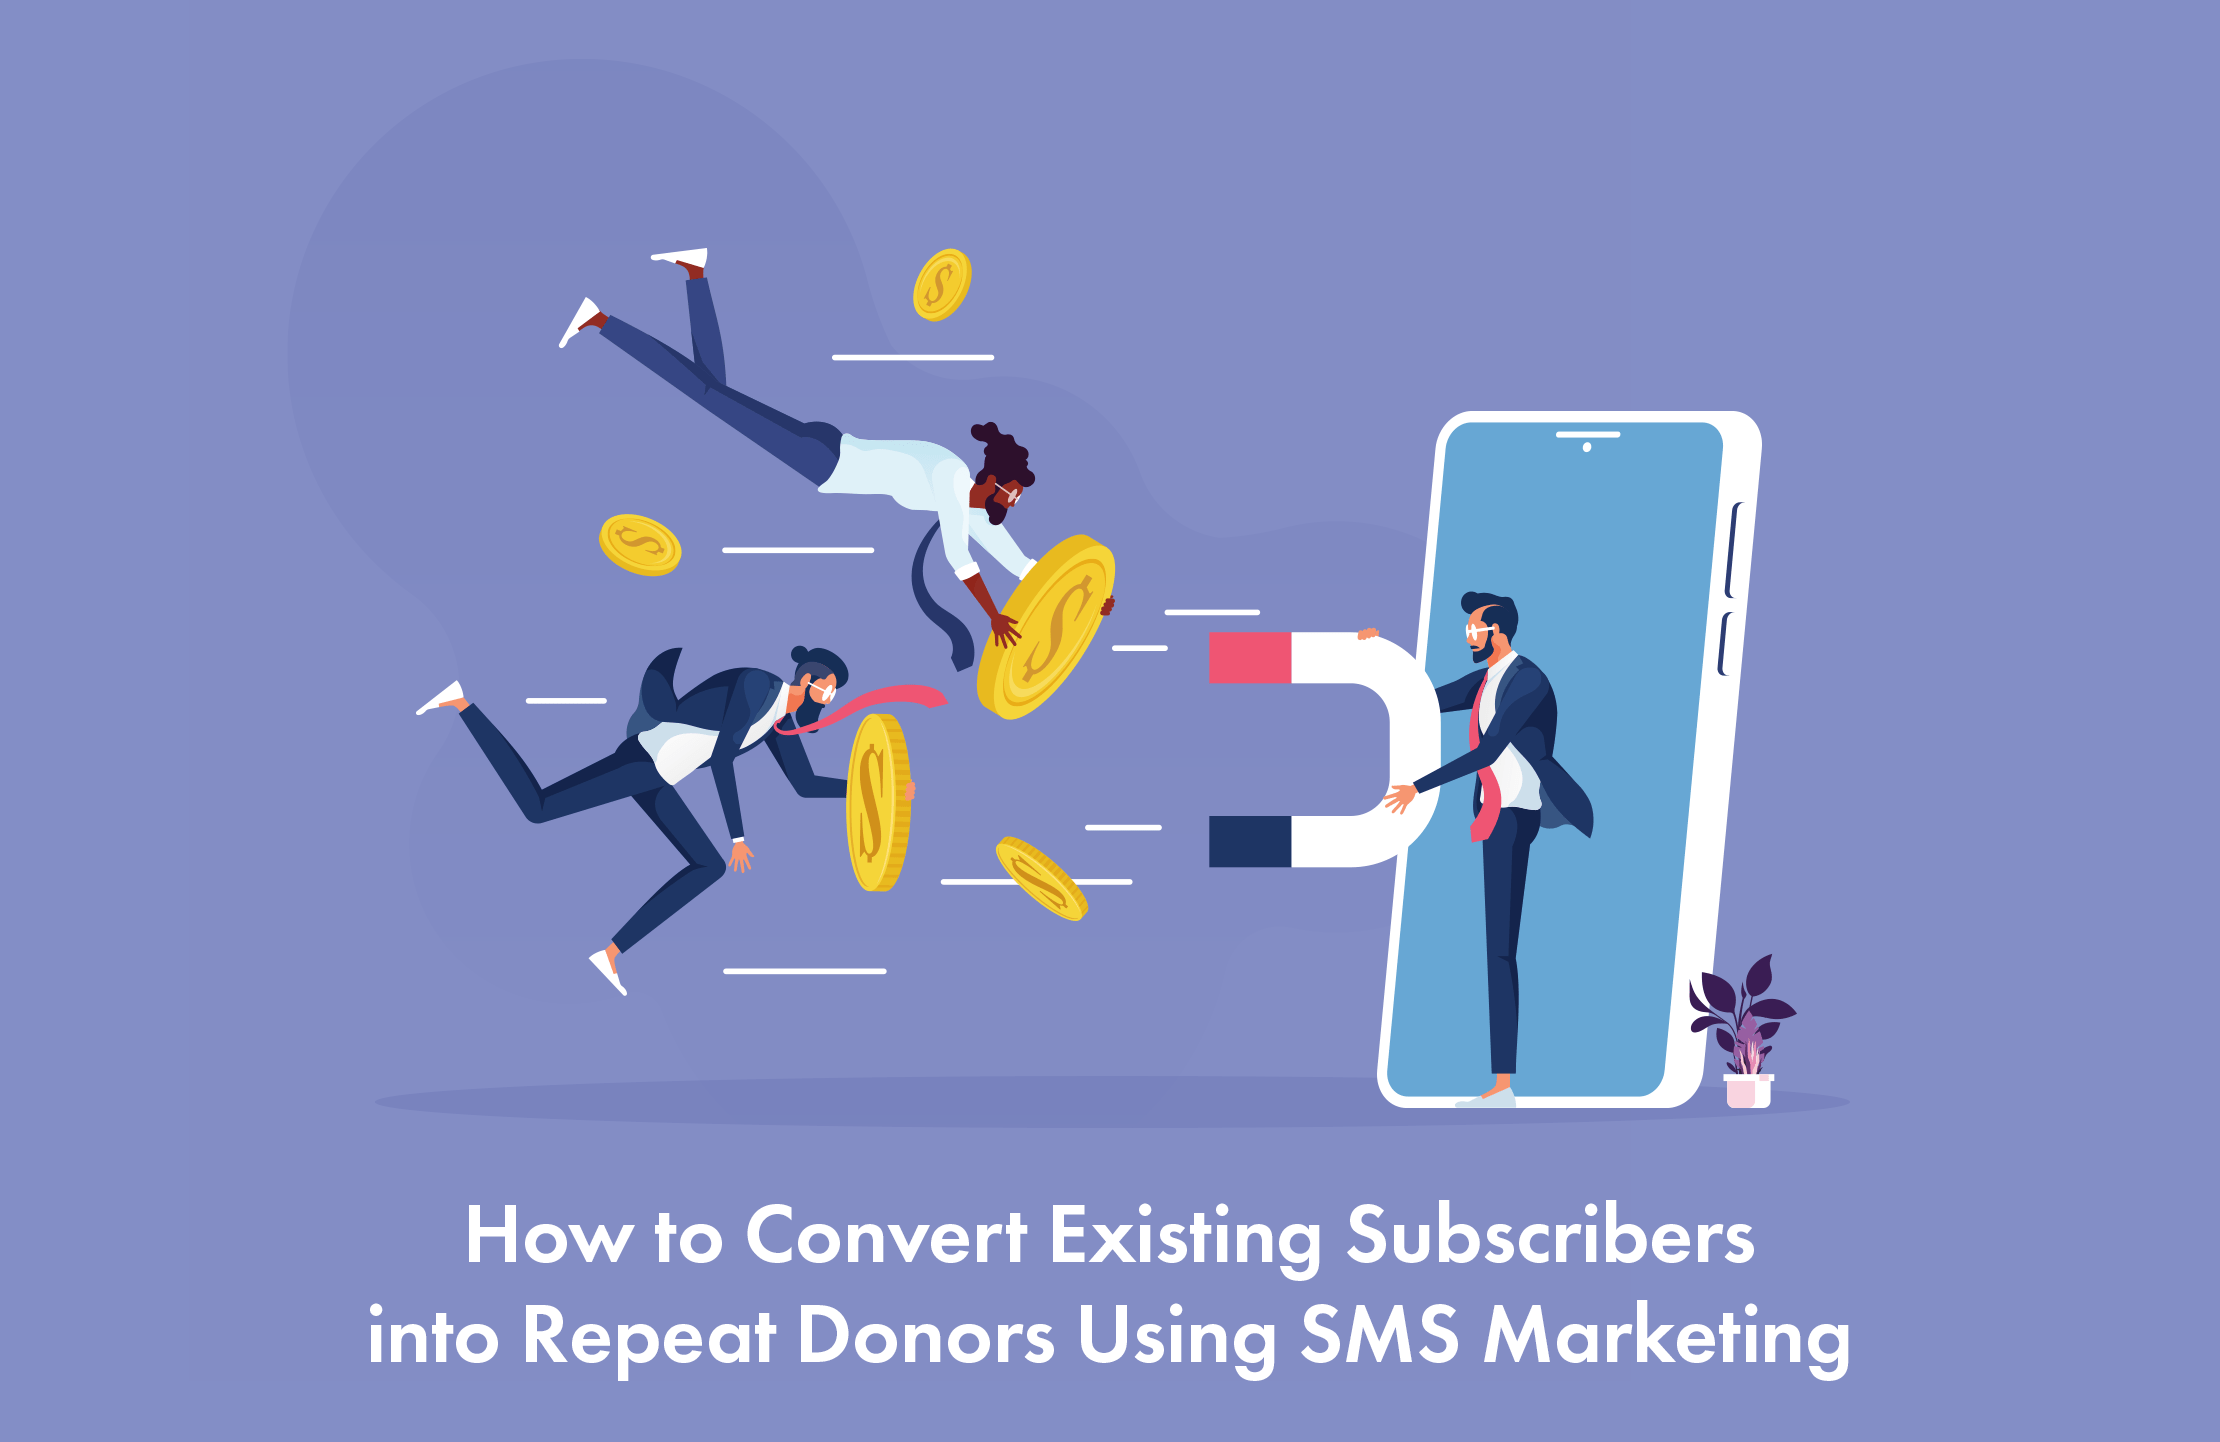 How to Convert Existing Subscribers into Repeat Donors Using SMS Marketing